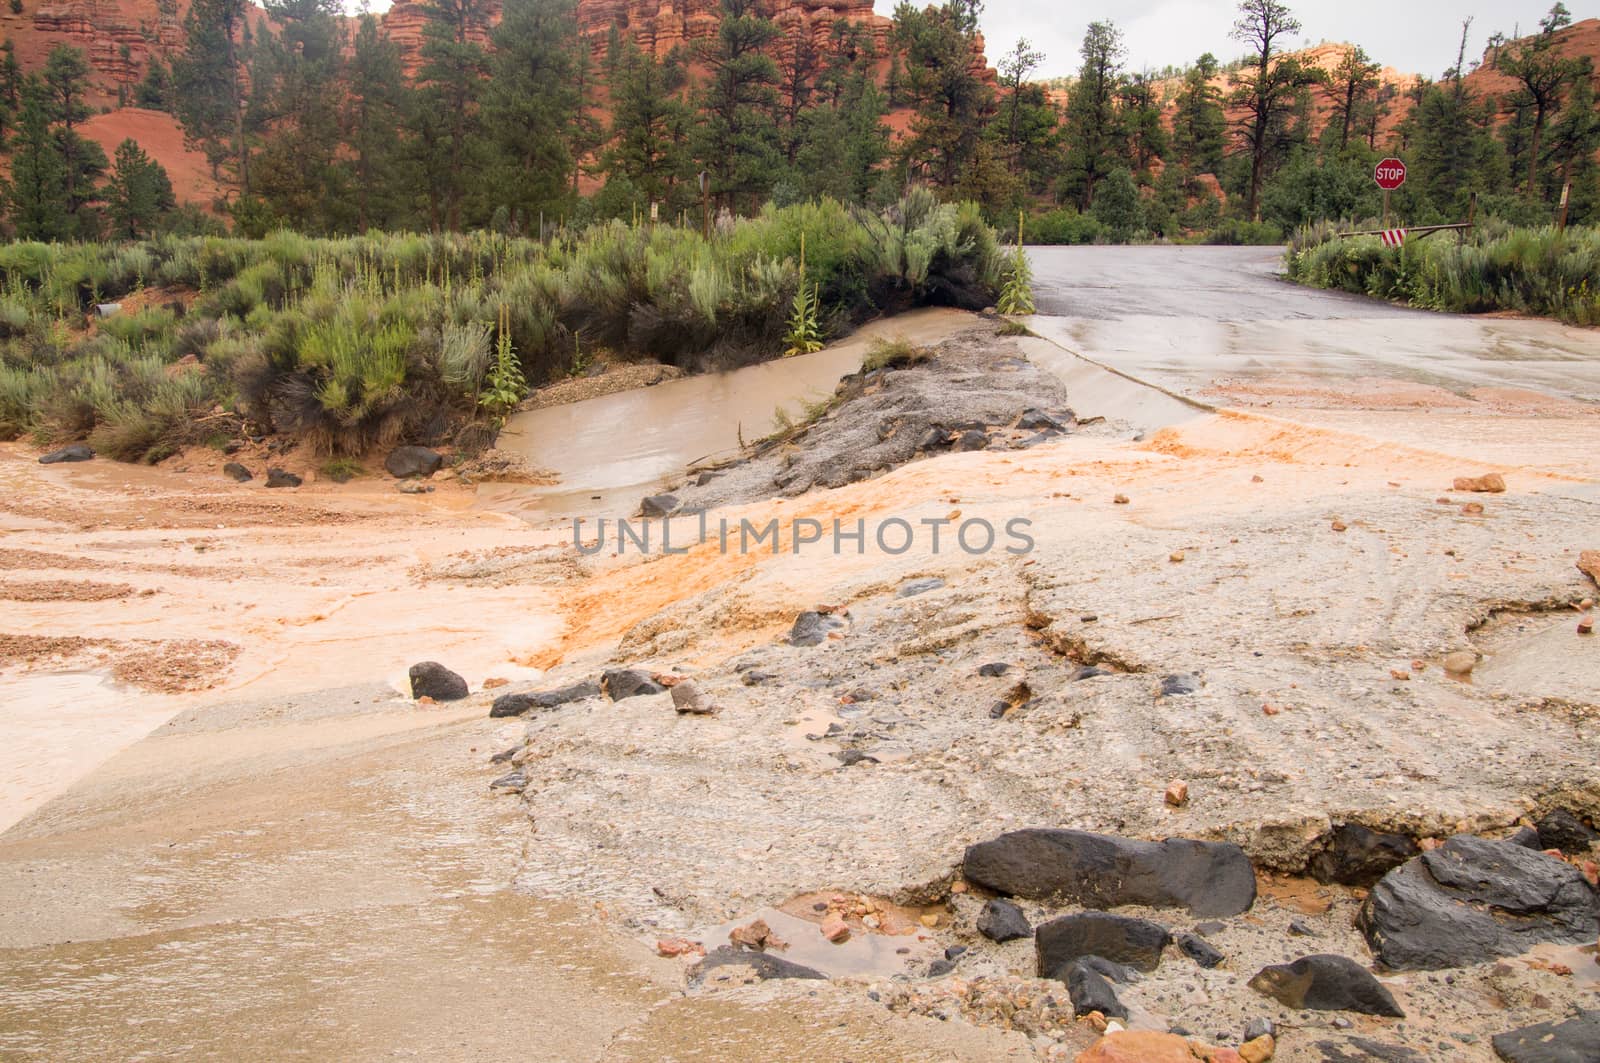 Summer storm flash floods at Red Canyon Utah by emattil